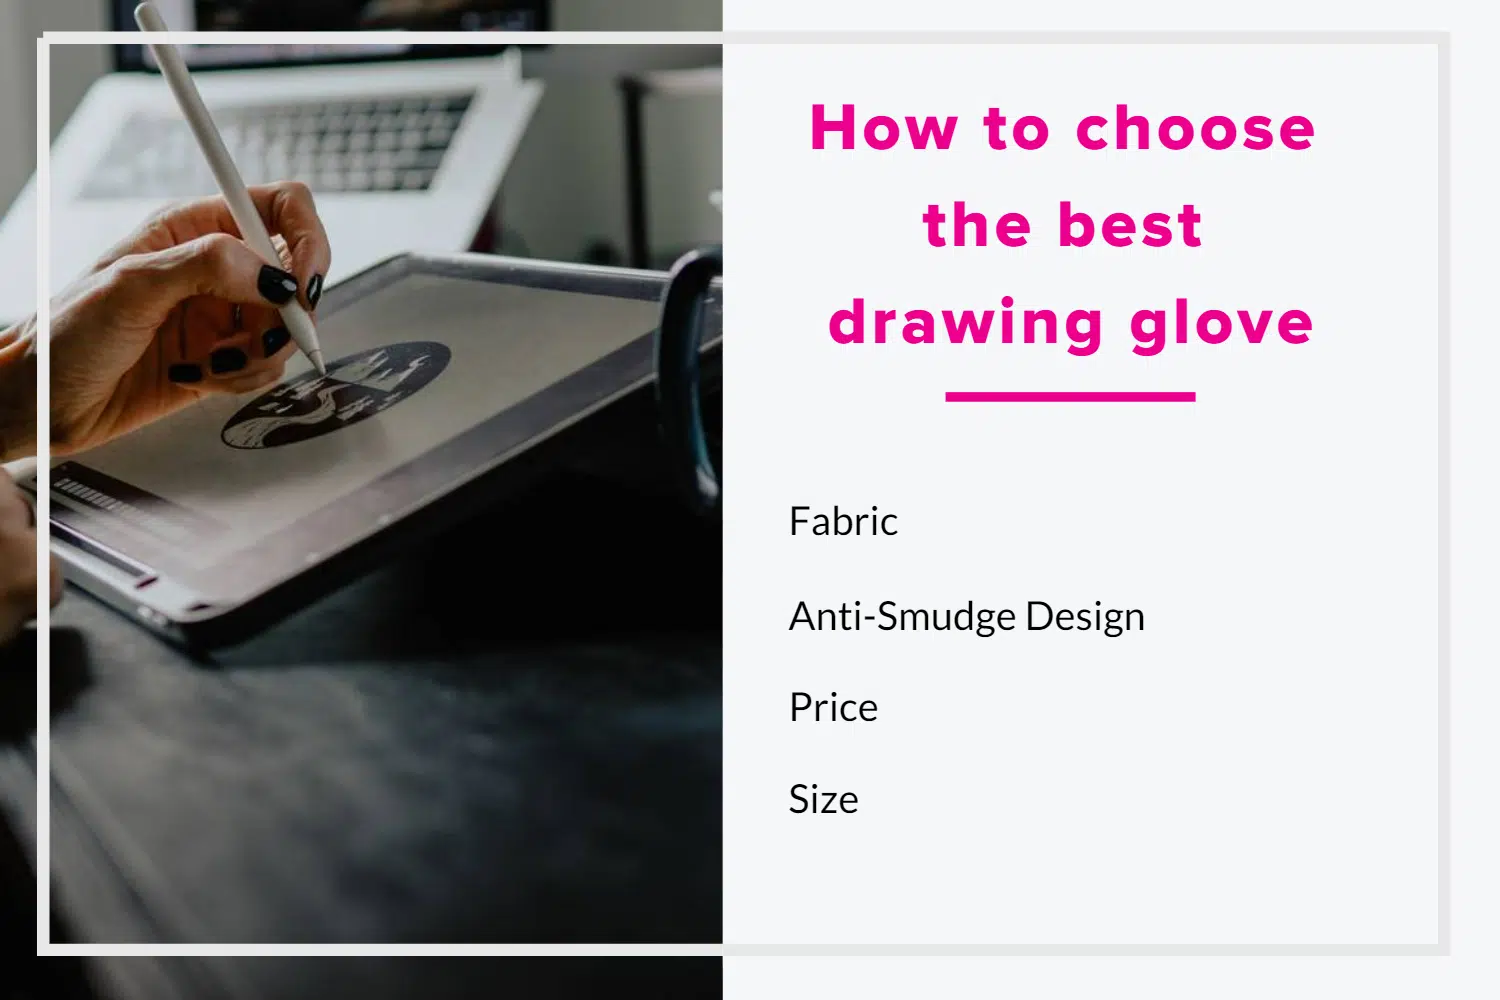 How to choose the best drawing glove